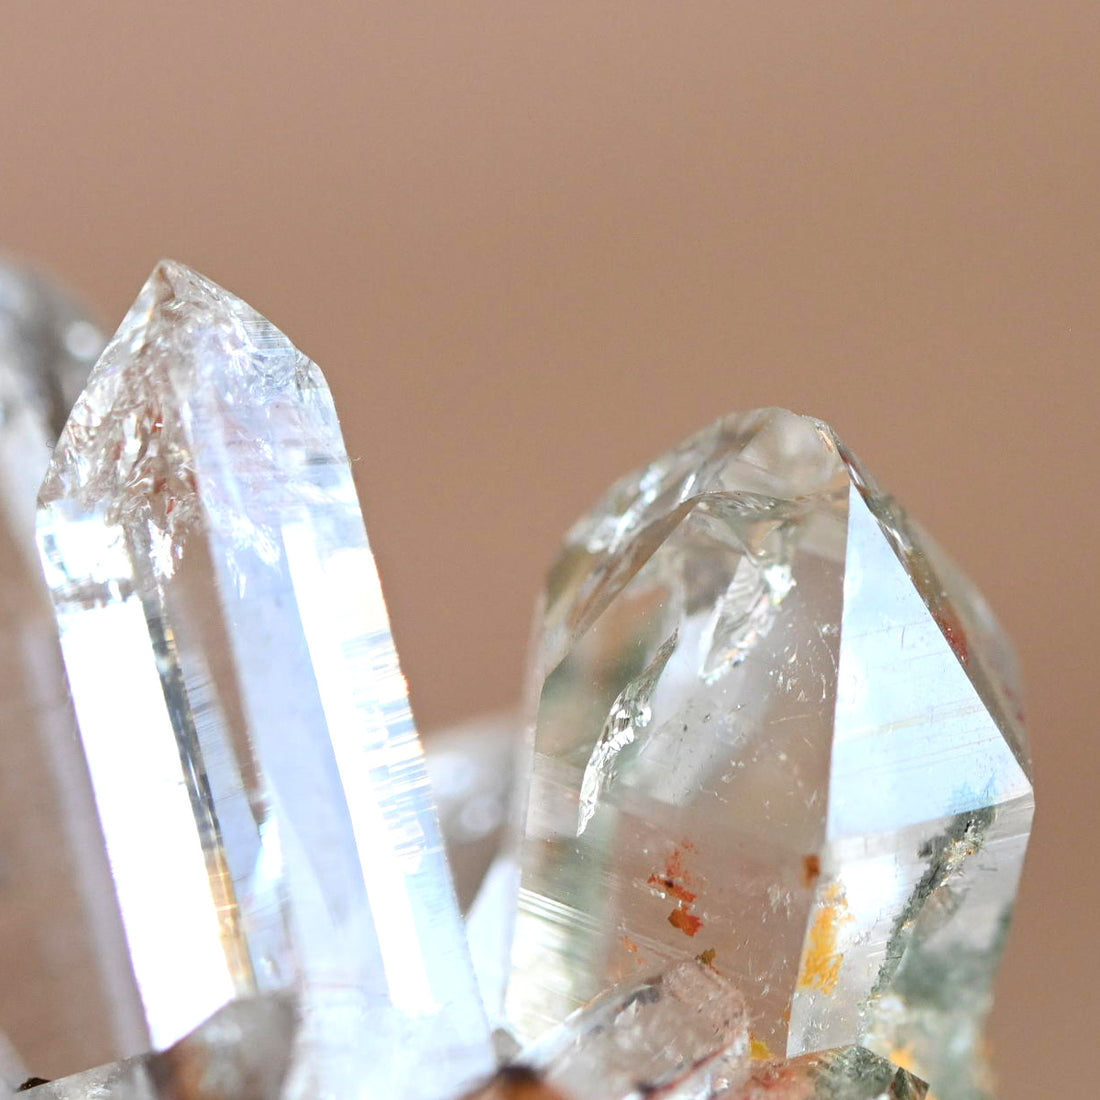 where to buy crystals online